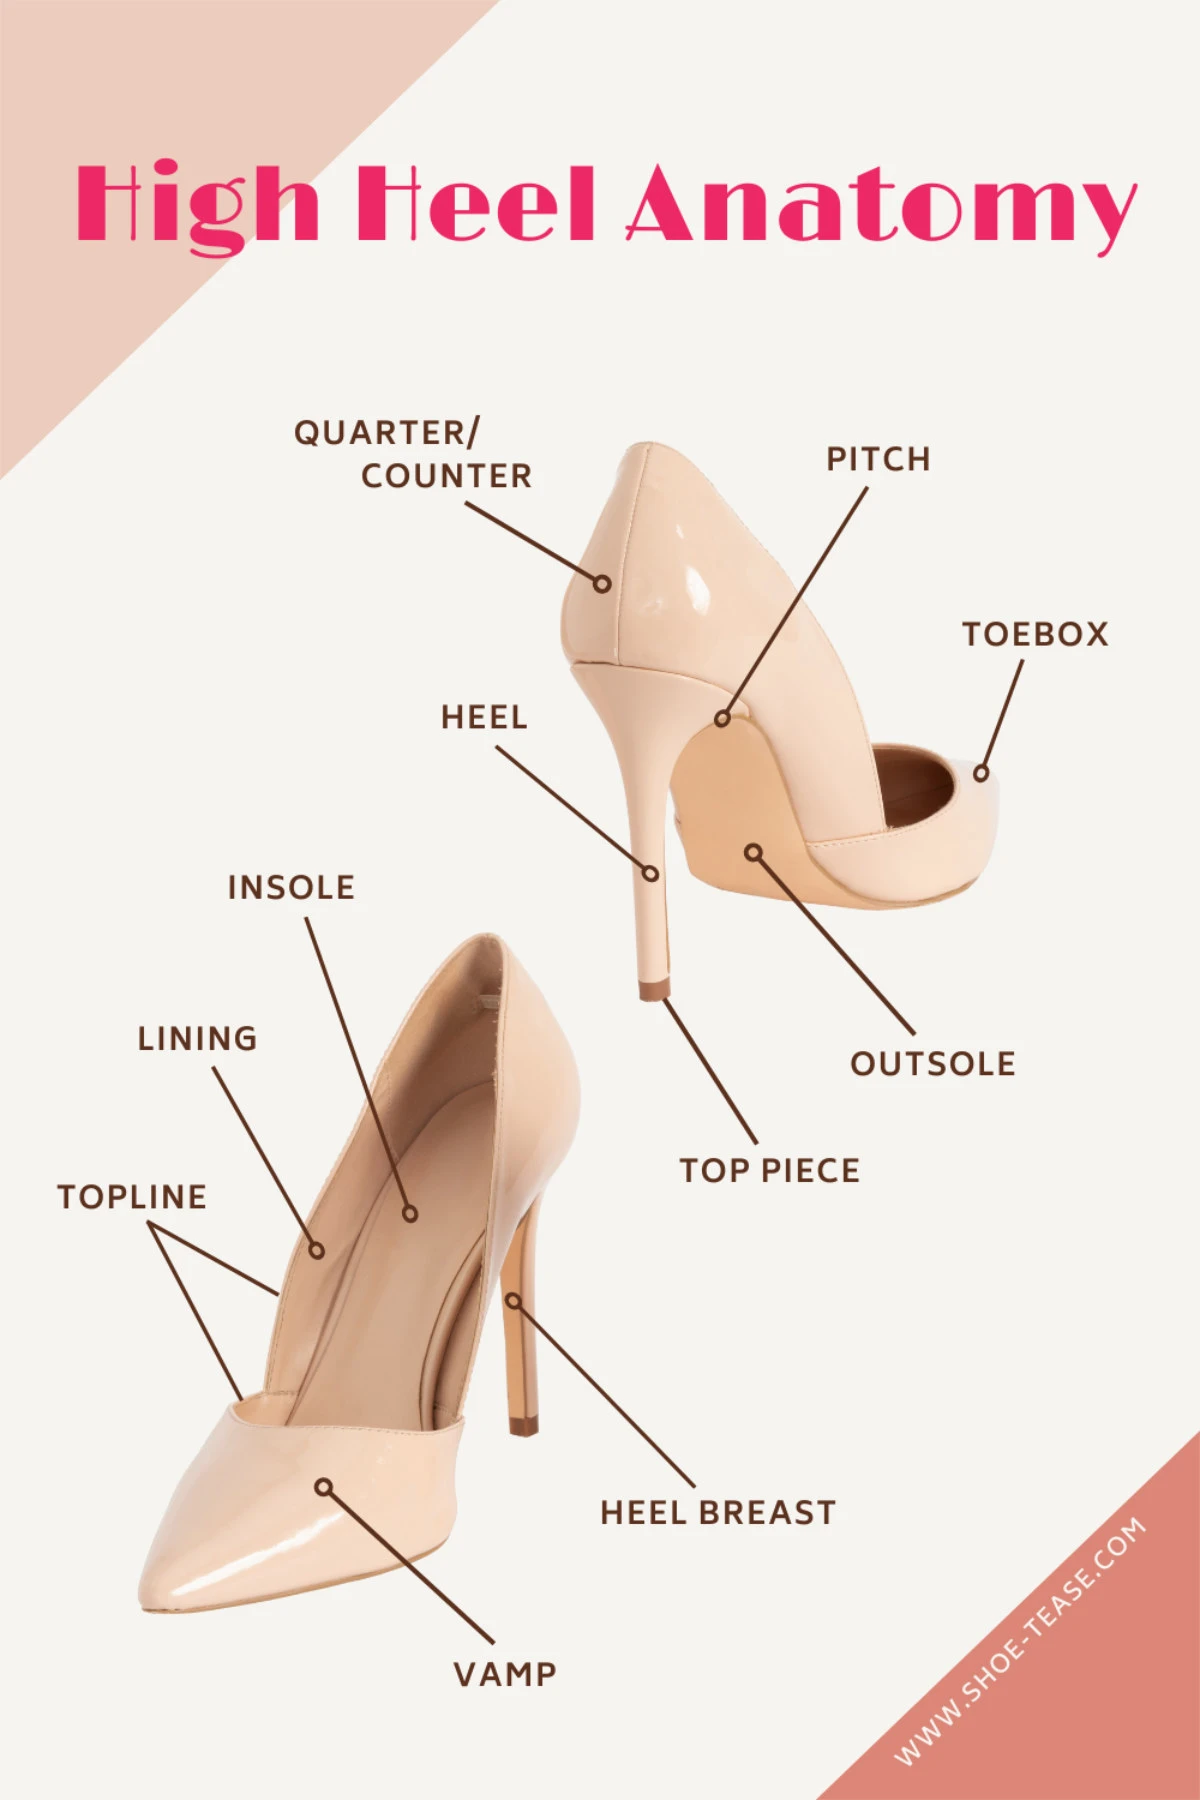 What Materials Are High Heels Made Of?